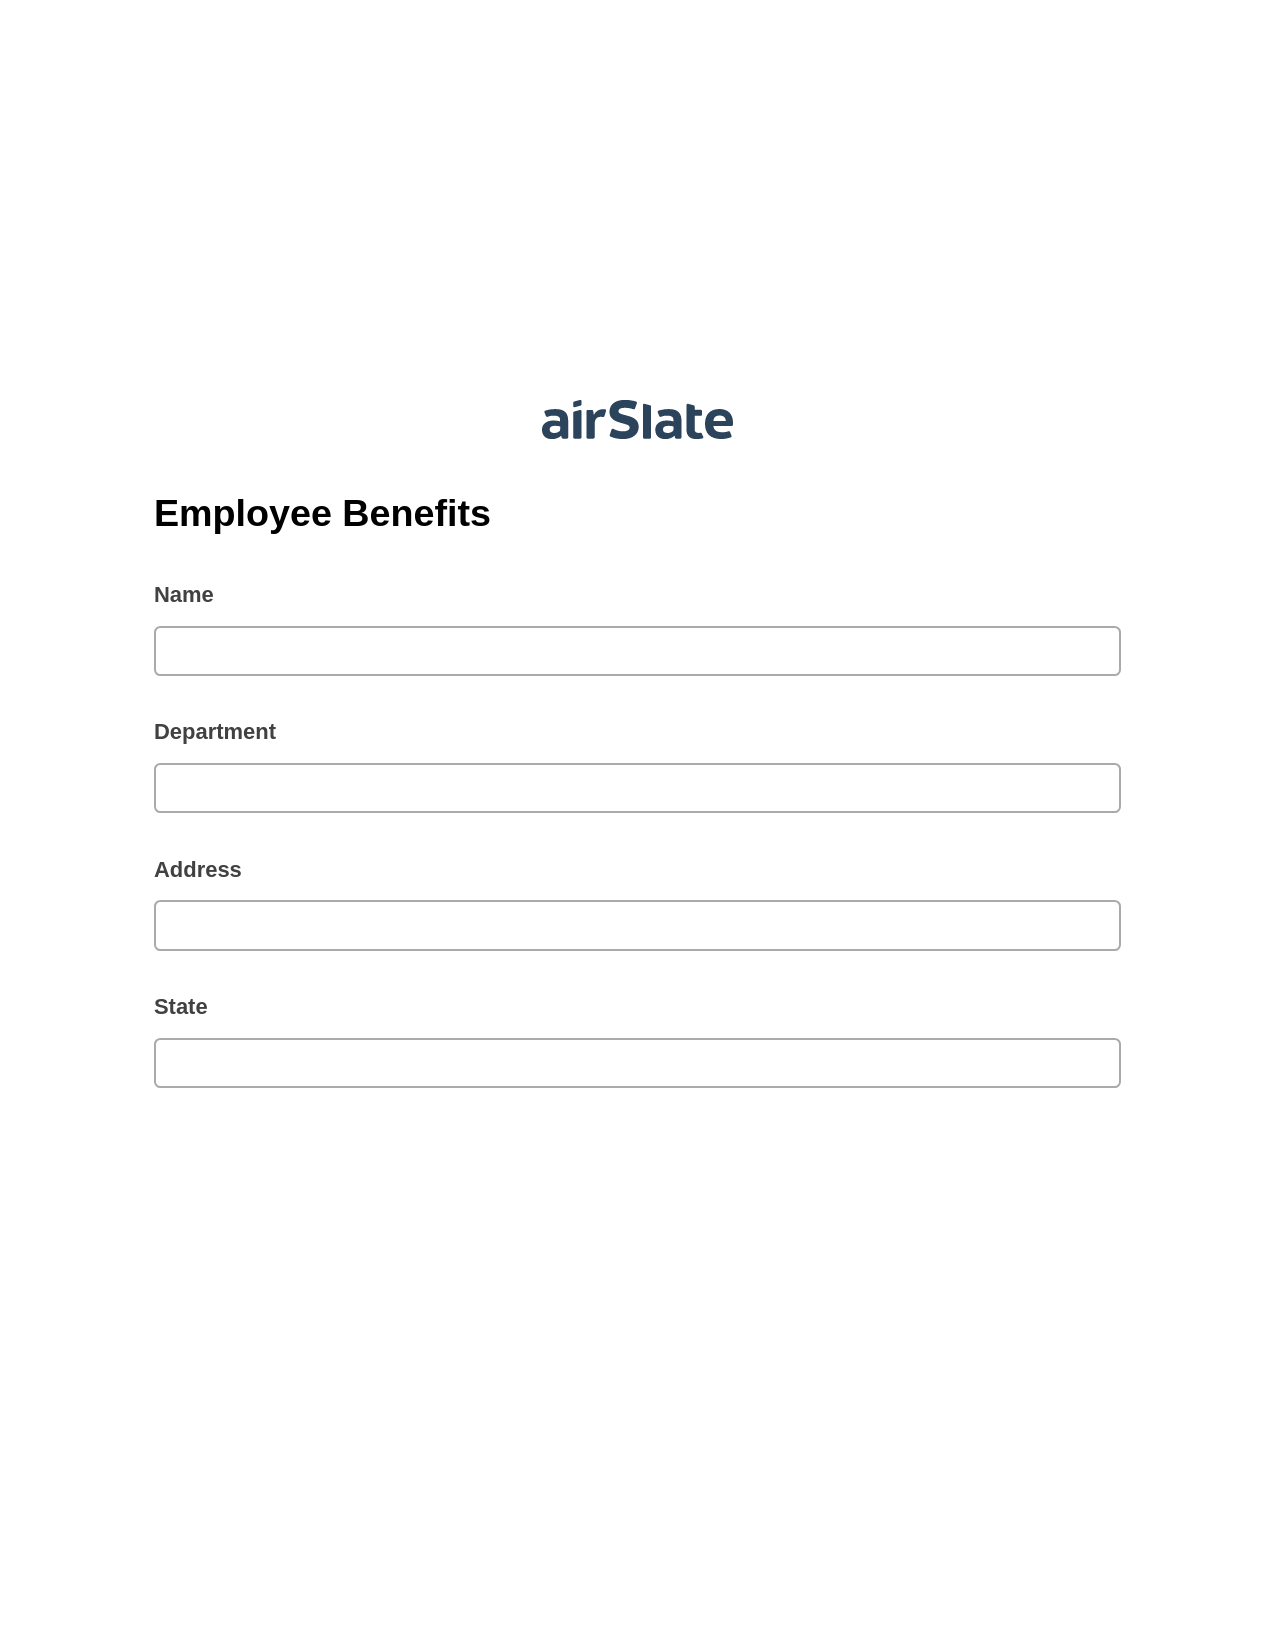 Employee Benefits Pre-fill Dropdowns from MySQL Bot, Revoke Access Bot, Export to Formstack Documents Bot